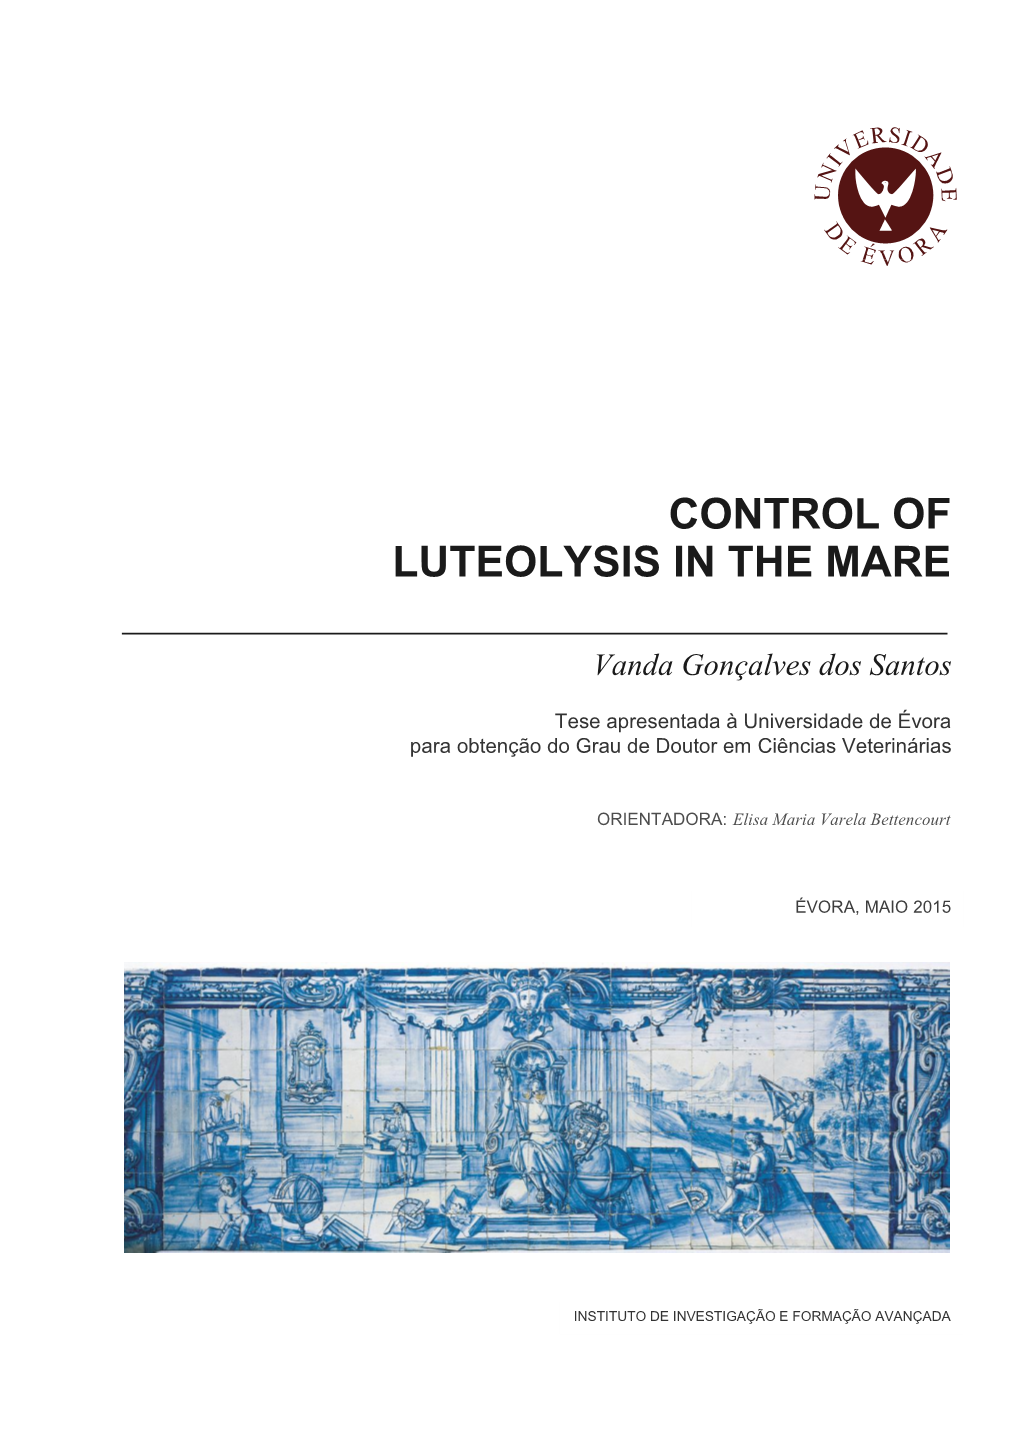 Control of Luteolysis in the Mare